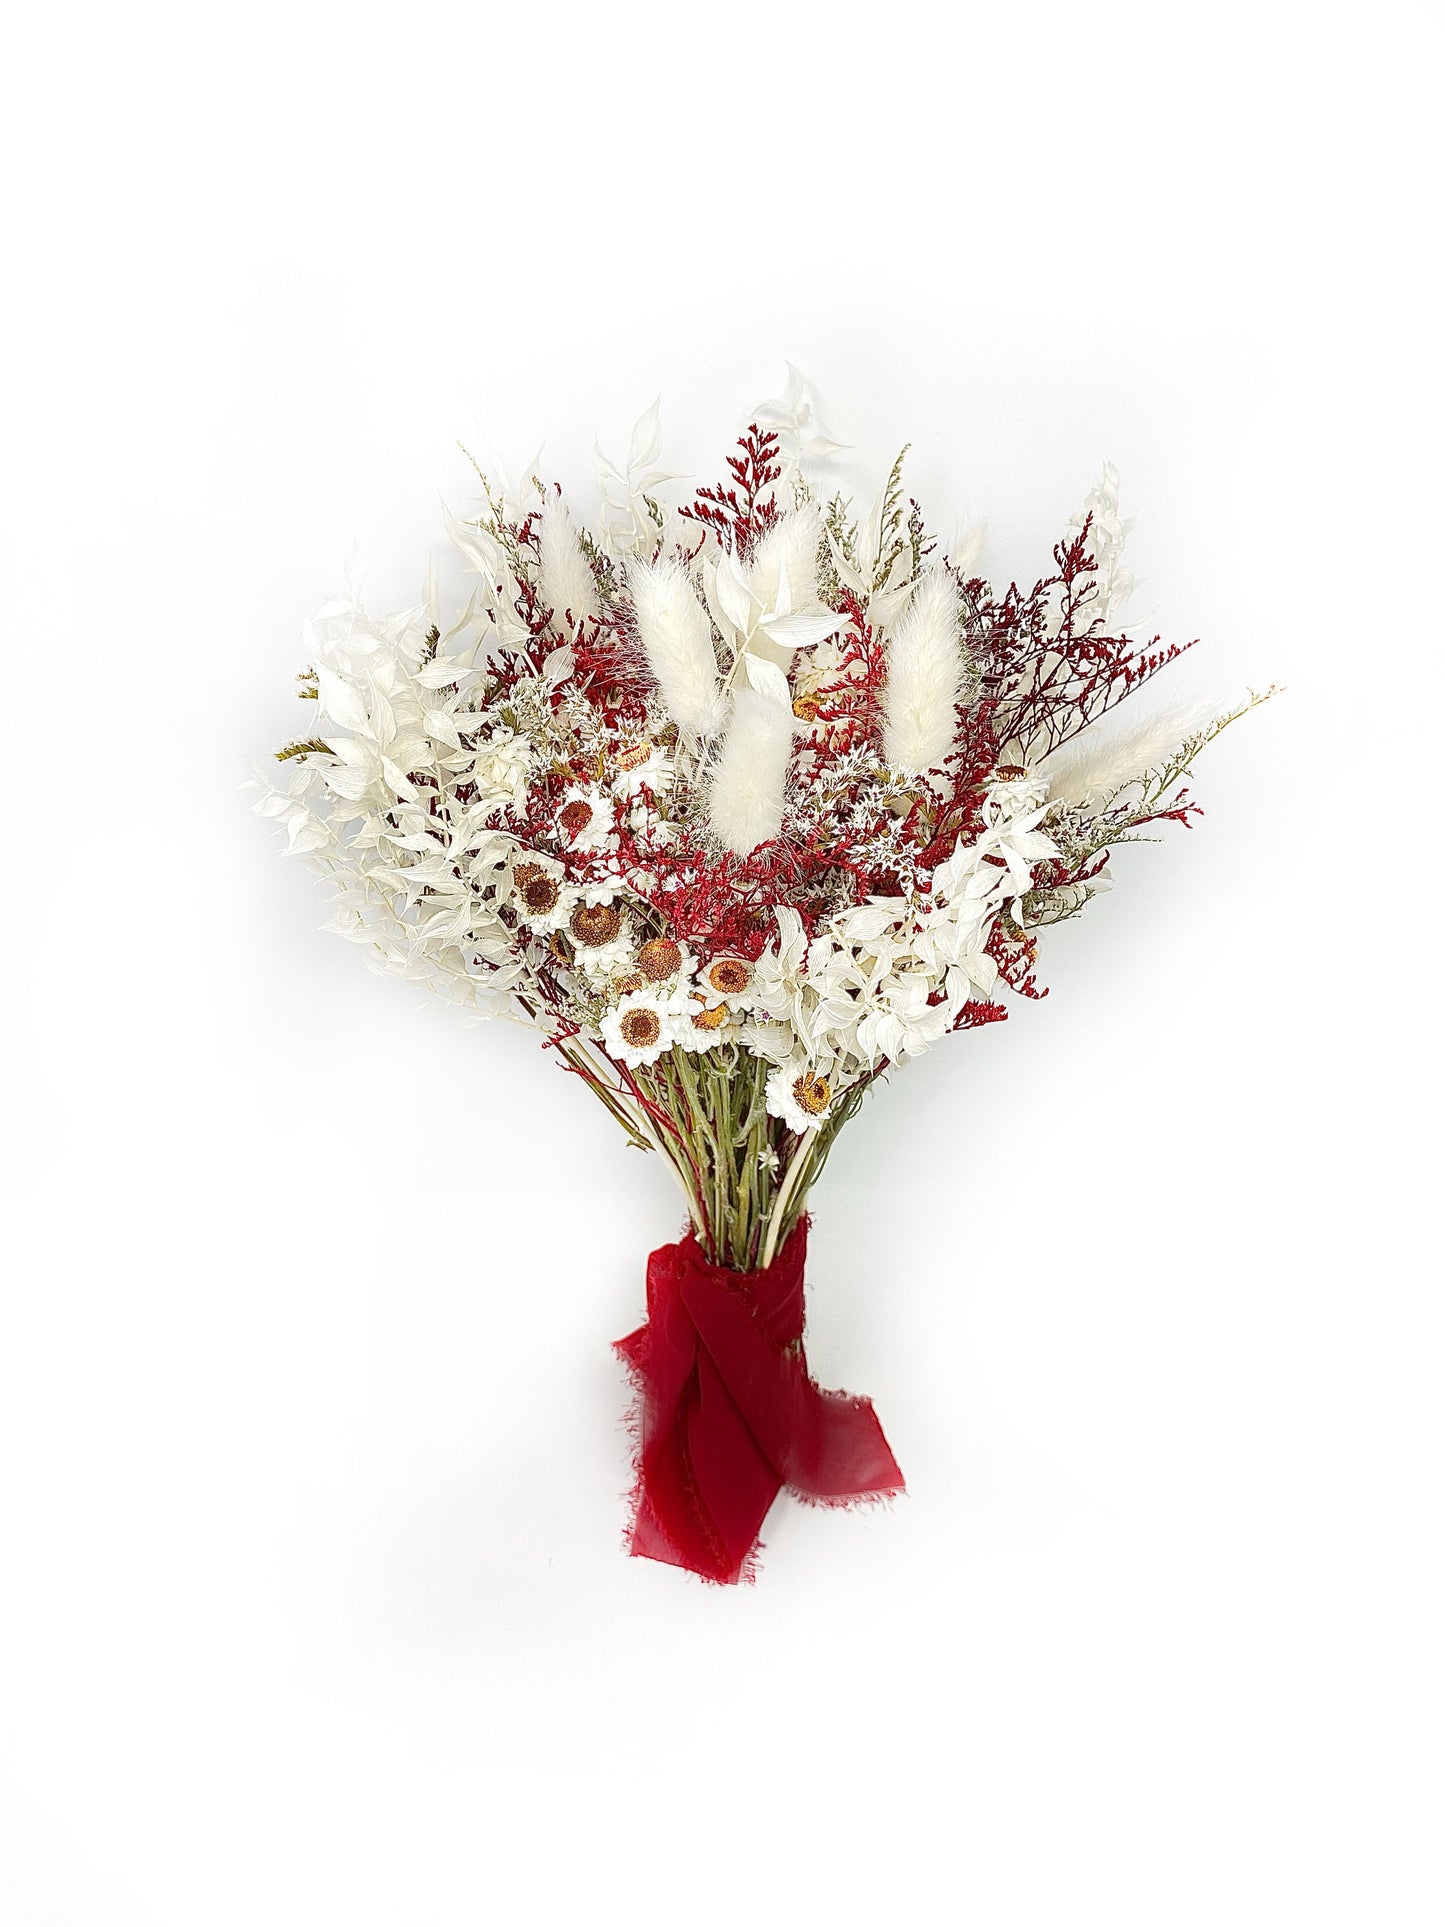 Red and White Bouquet, Christmas Wedding, Burgundy Dried Flowers, Preserved Floral, Rustic, Bunny Tails, Bridal, Winter, Throw, Spring